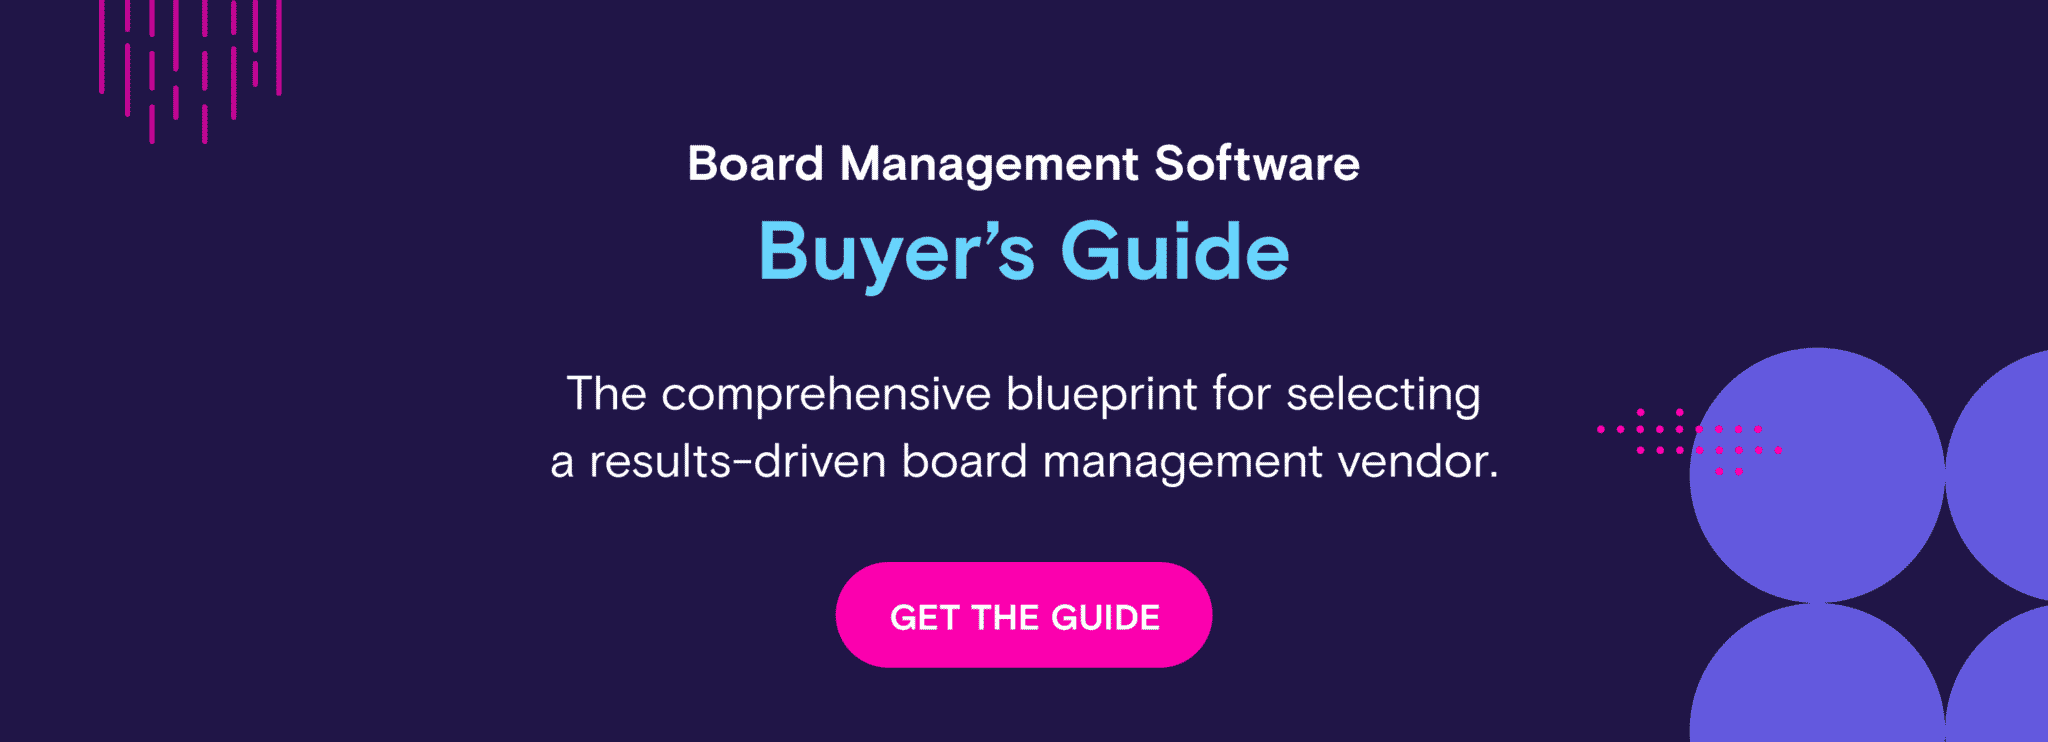 board-management-software-buyers-guide-offer